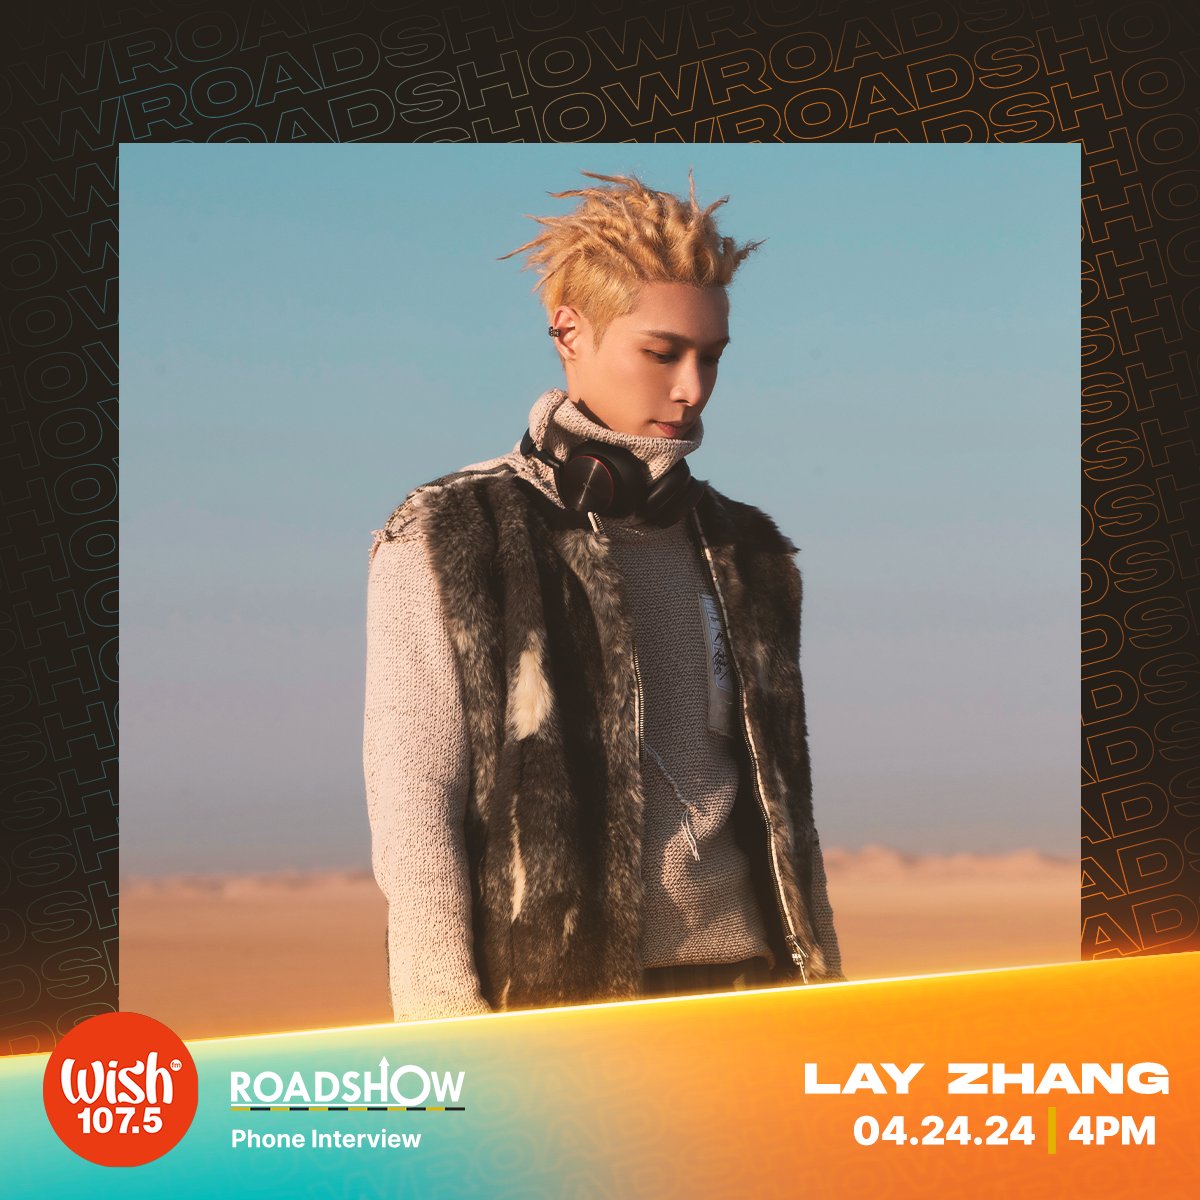 Tune in to today's Roadshow as Chinese singer-actor @layzhang joins us for a special Roadshow interview!